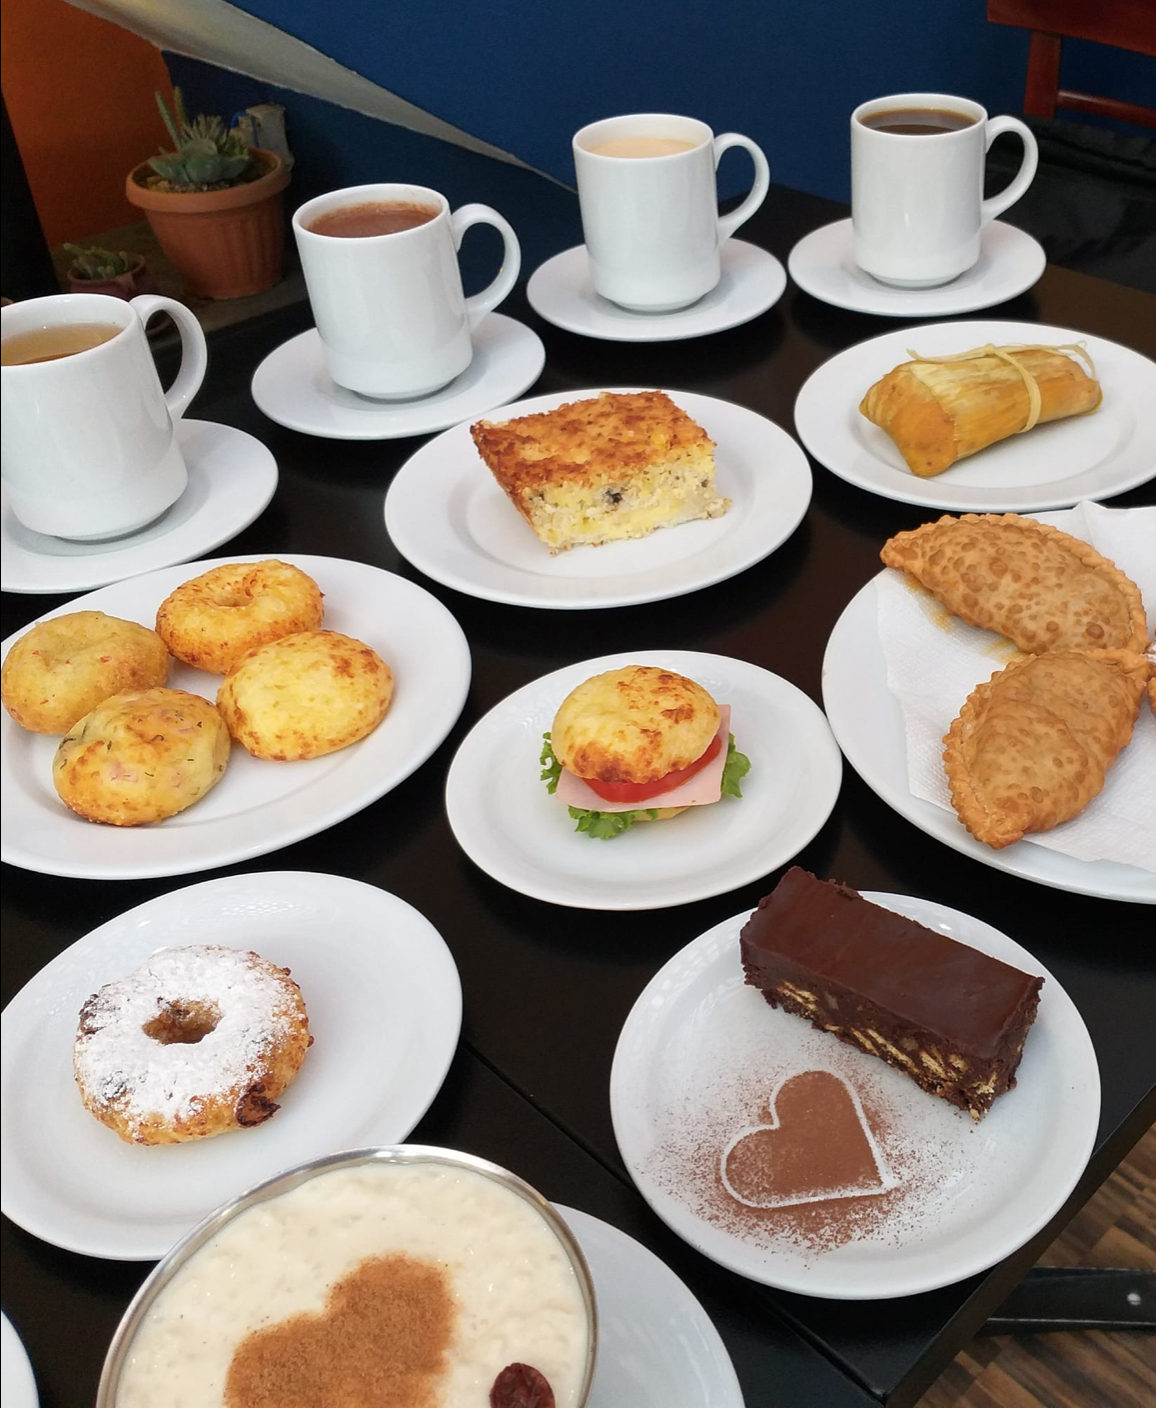 Tea time at  Los Qñapes with Bolivian pastries!